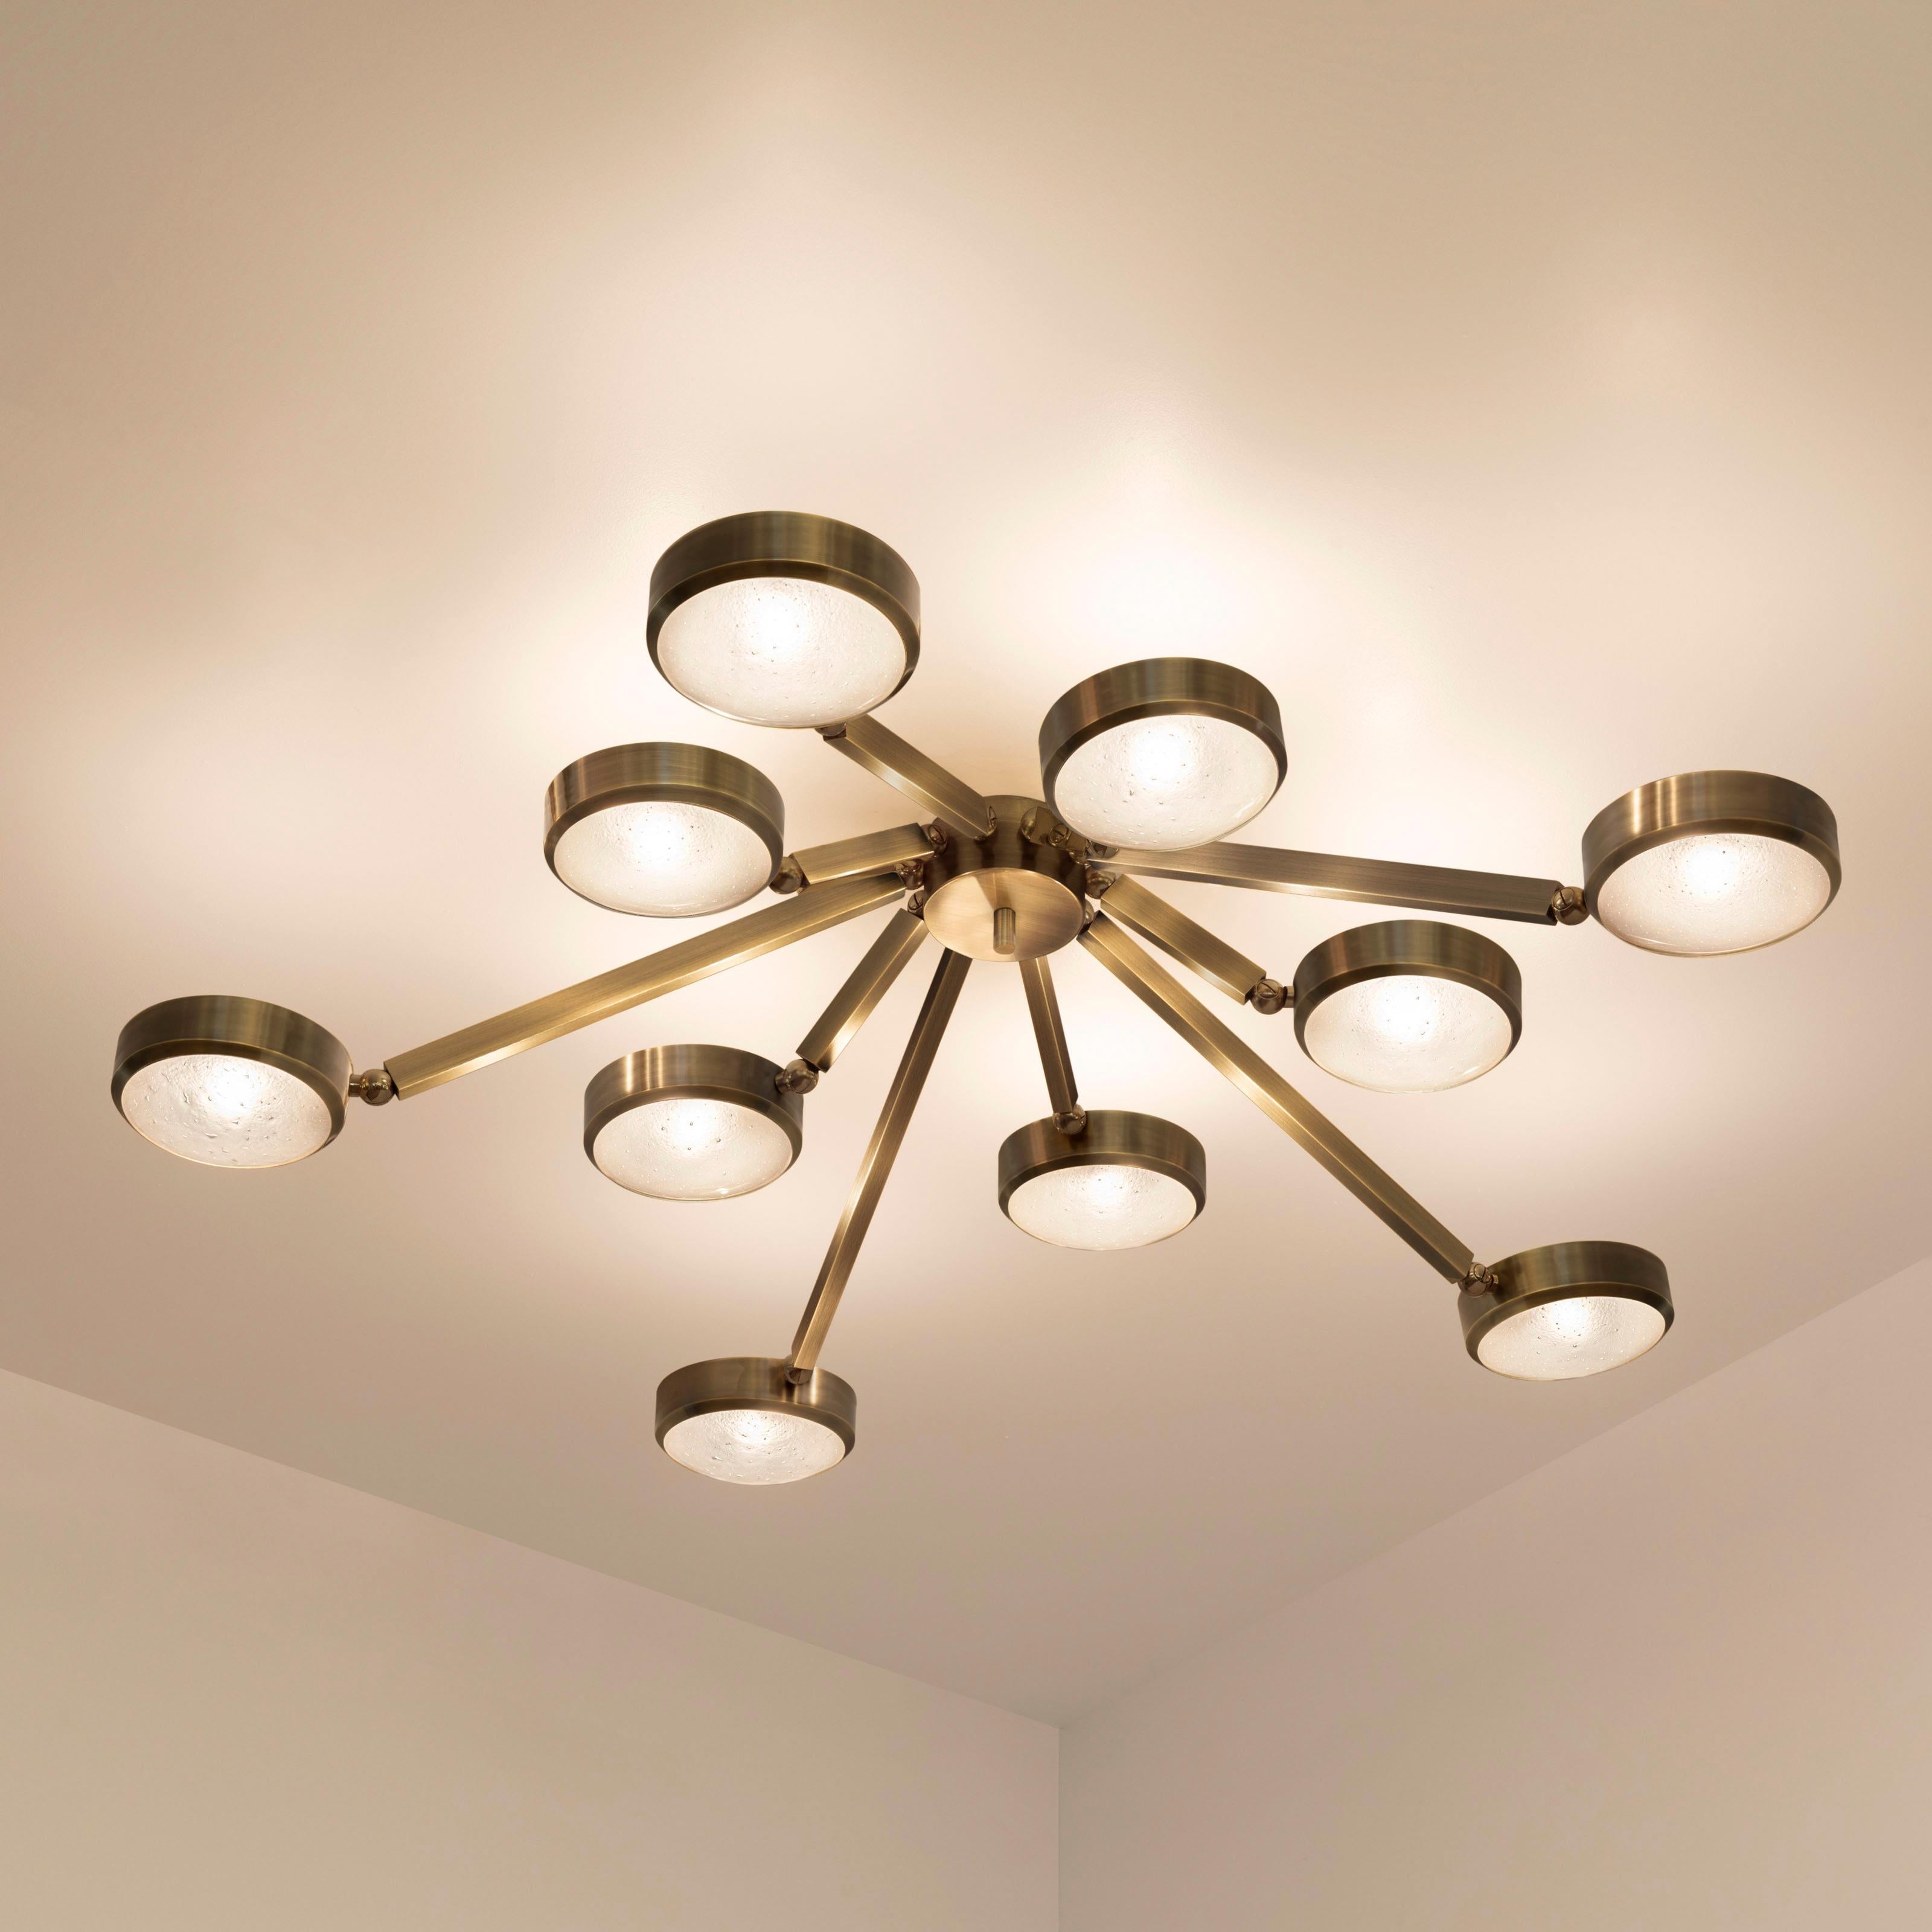 Italian Oculus Ceiling Light by Gaspare Asaro-Murano Glass and Polished Nickel Finish For Sale